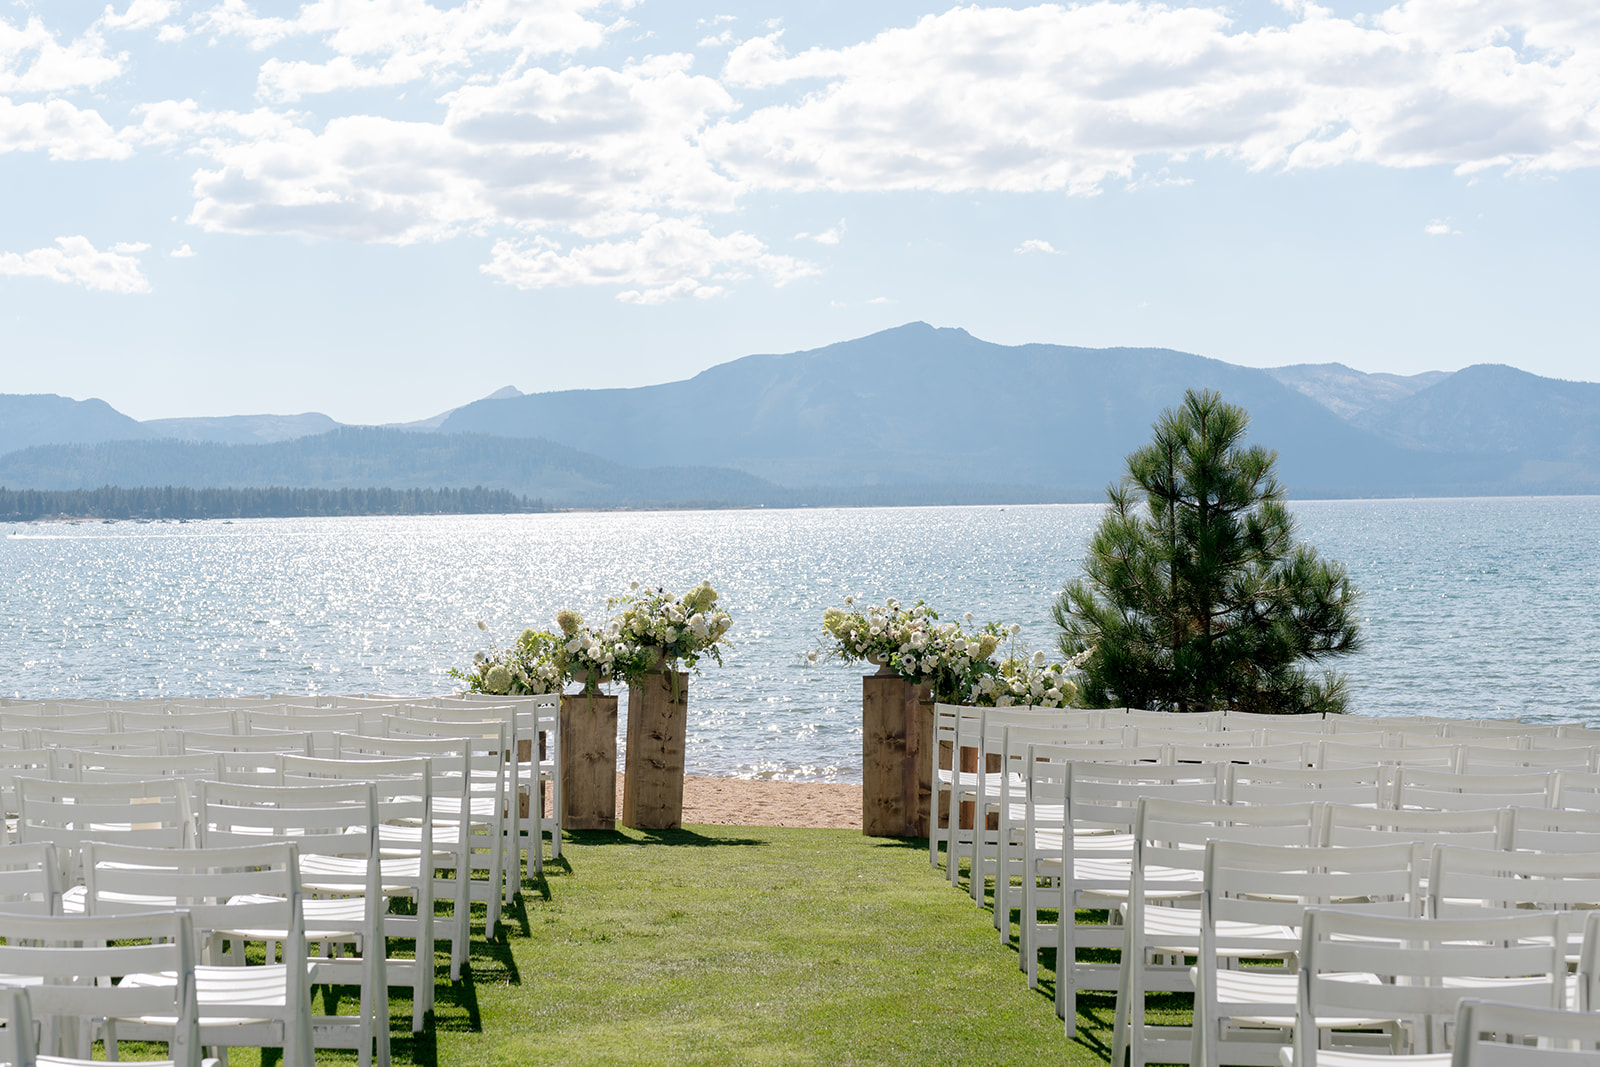 A Ceremony on the greens of Edgewood Tahoe